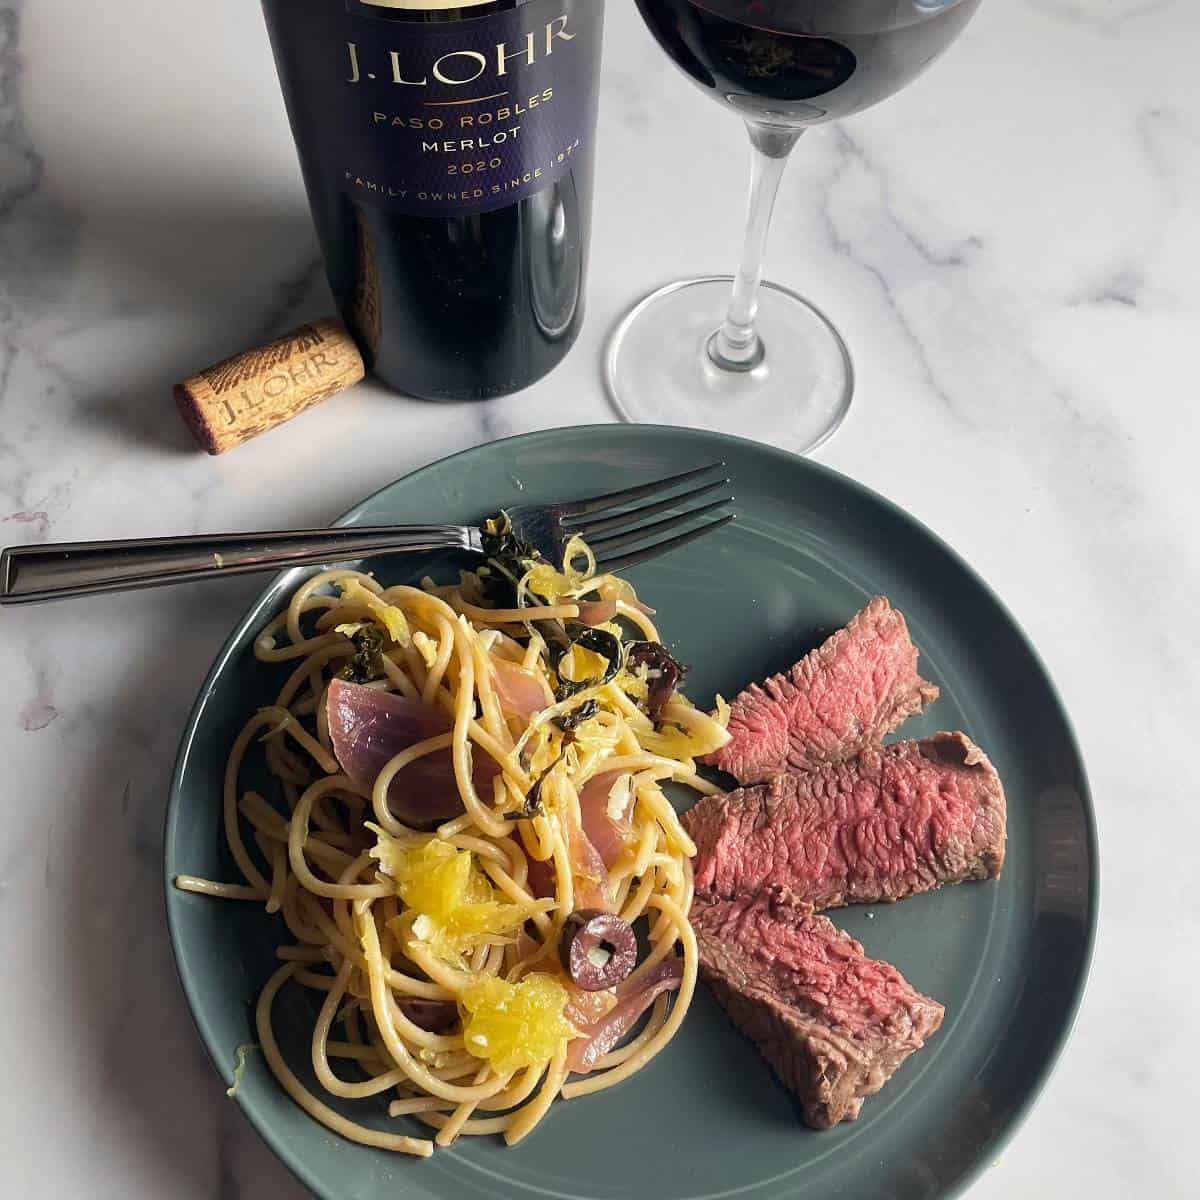 slices of steak served on a dark colored plate along with spaghetti and vegetables, and a glass of Merlot red wine.